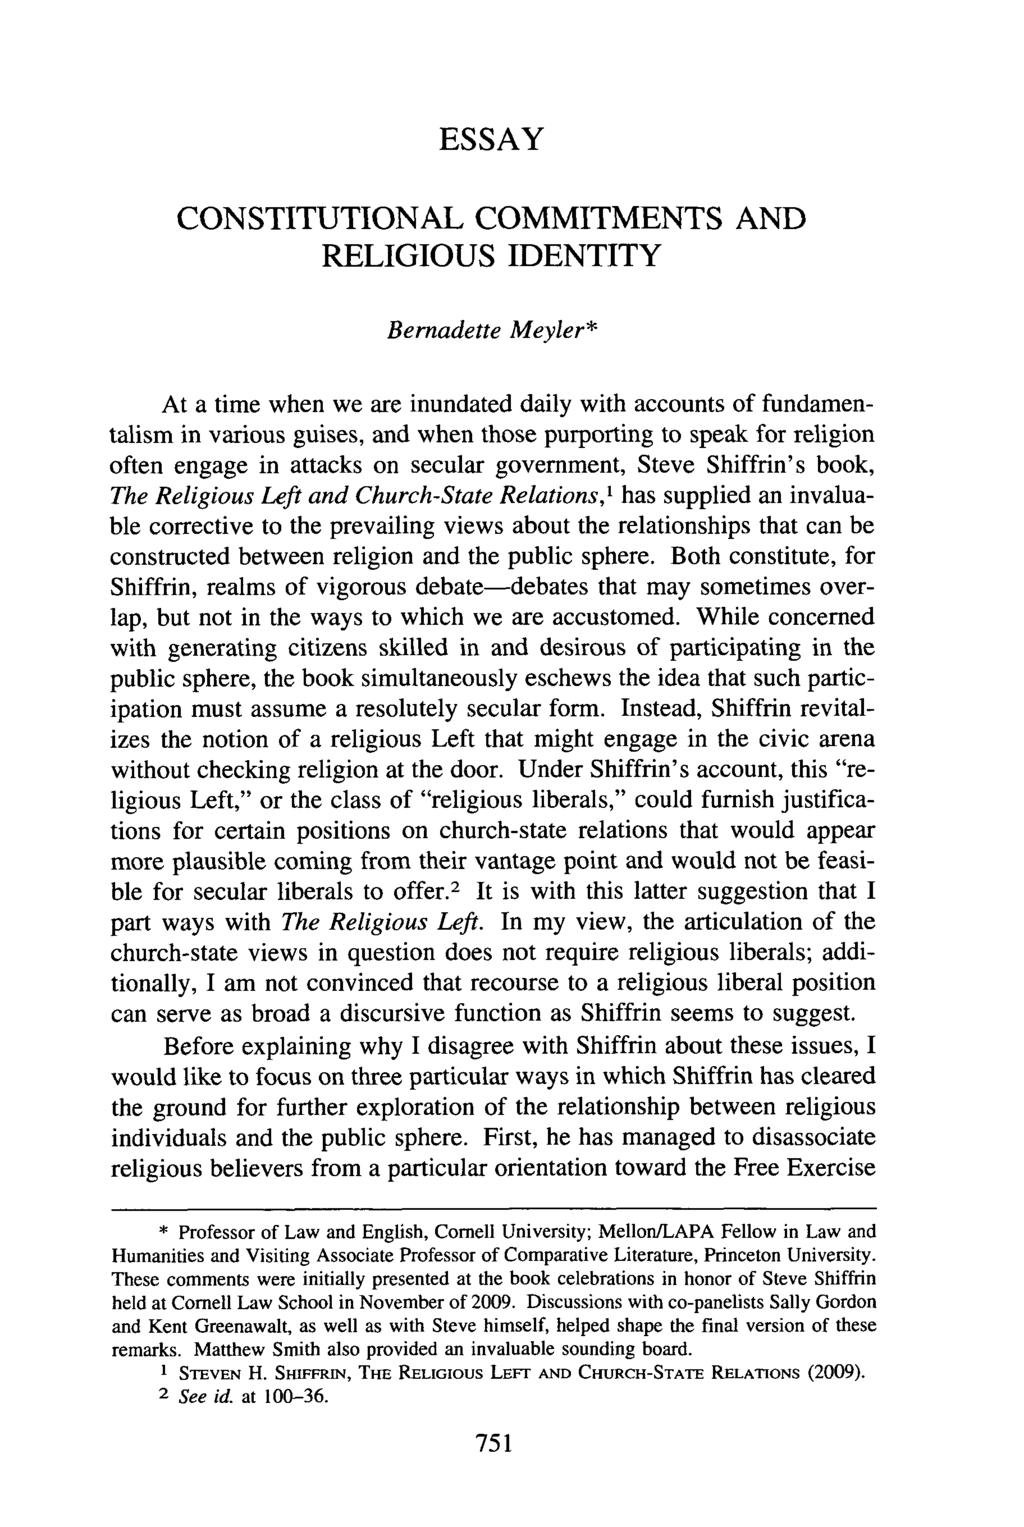 ESSAY CONSTITUTIONAL COMMITMENTS AND RELIGIOUS IDENTITY Bernadette Meyler* At a time when we are inundated daily with accounts of fundamentalism in various guises, and when those purporting to speak